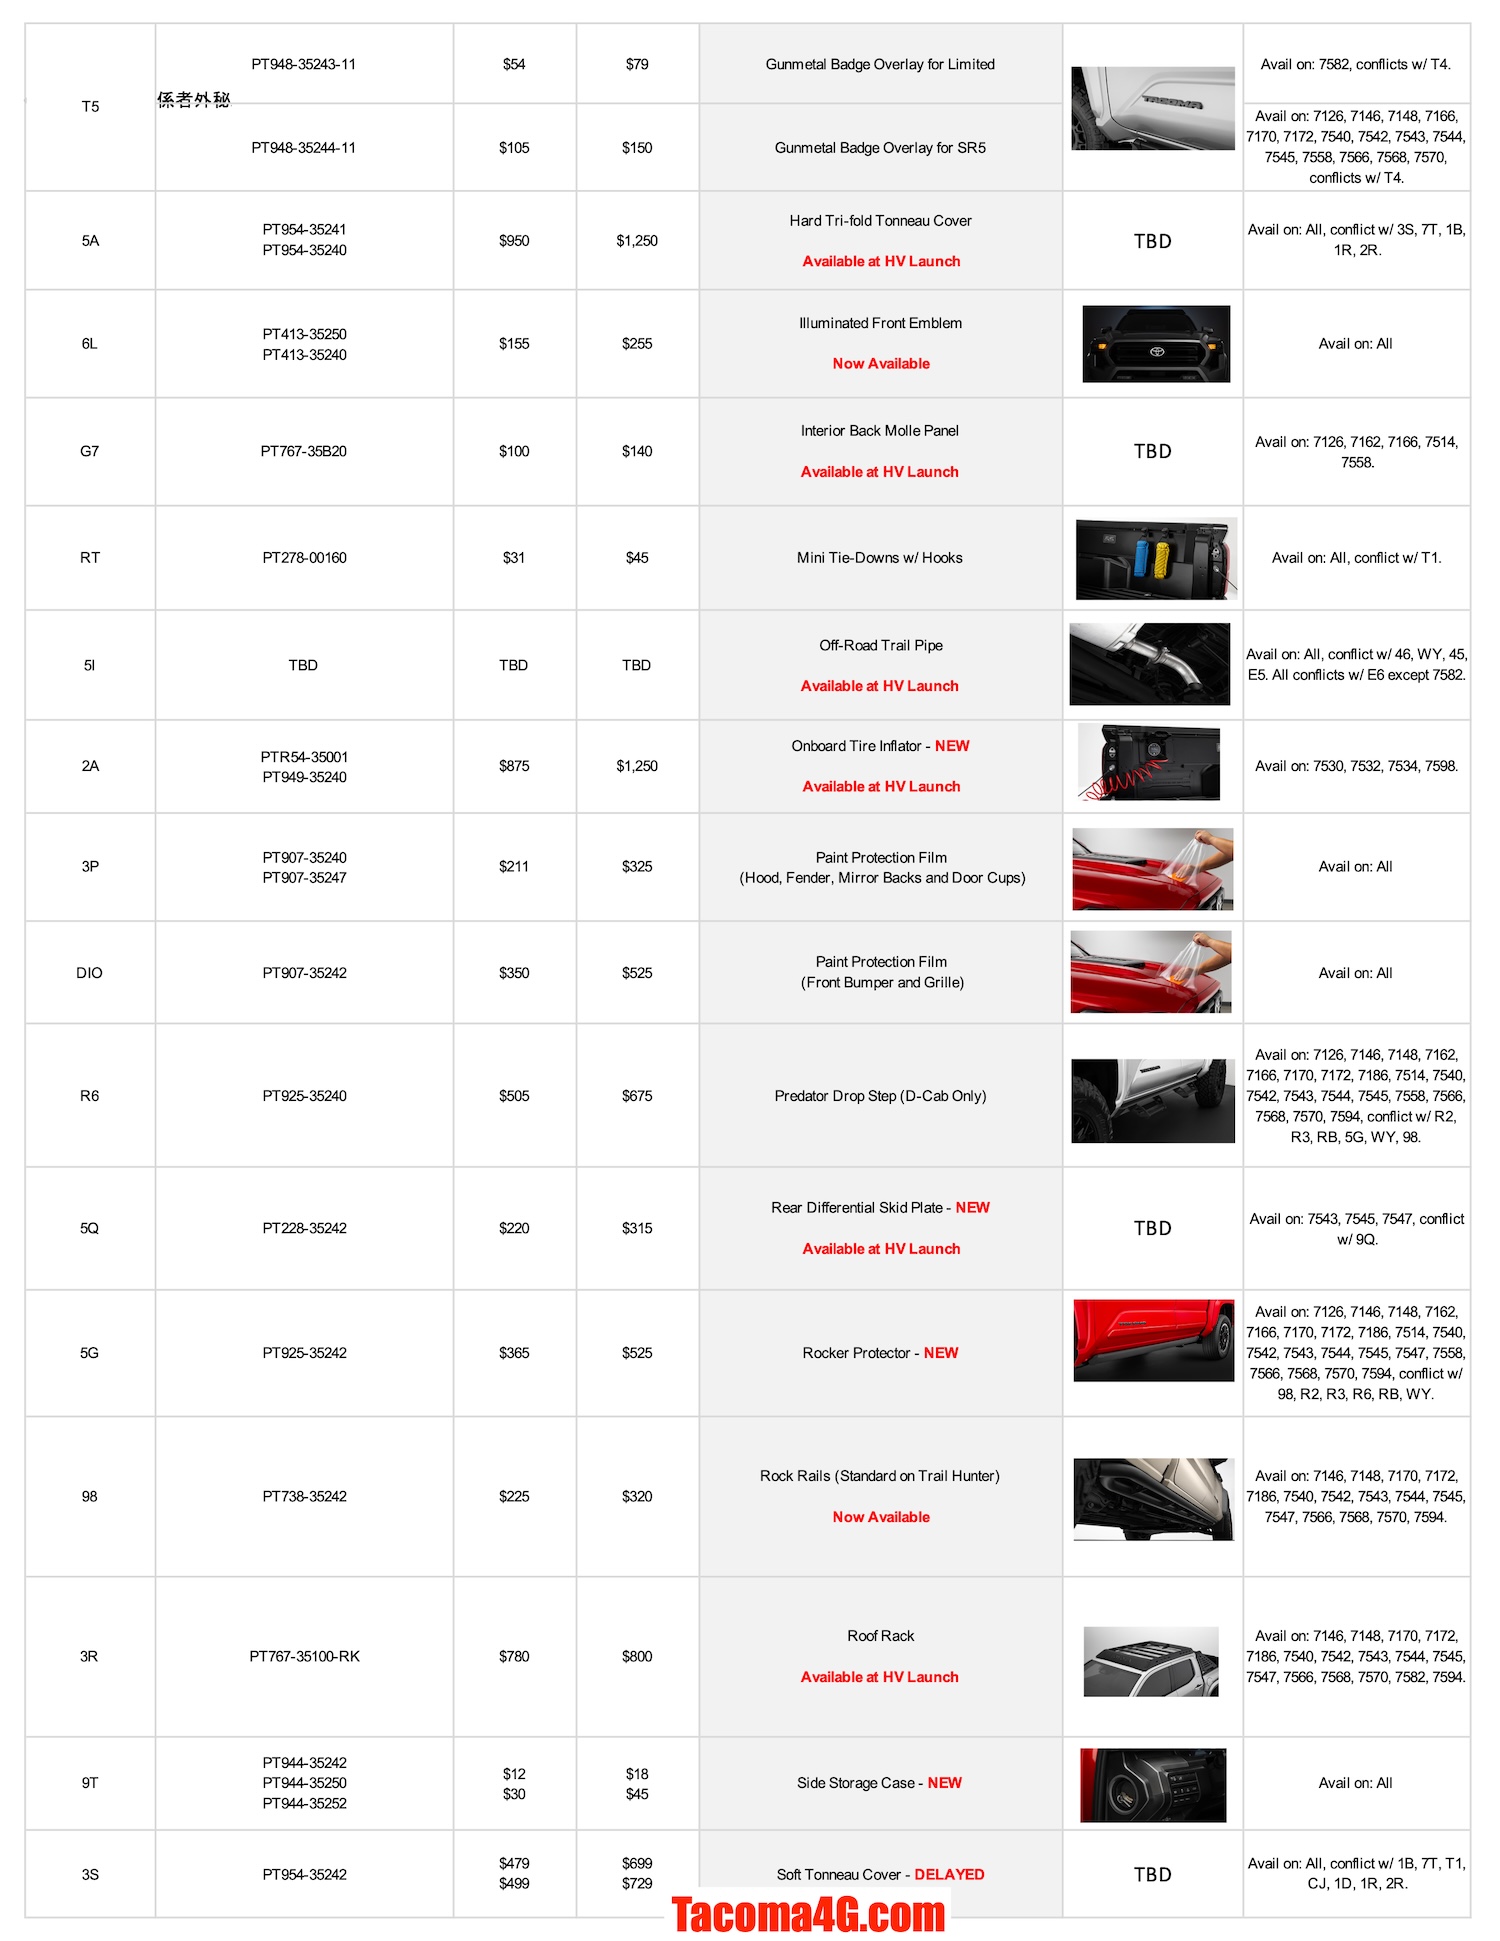 2024 Tacoma 2024 Tacoma Dealer Installed Options (DIO) Accessories Parts Guide + Pricing (Updated 5/7/24) MY24 Tacoma DIO Parts Guide_04_02_24-3